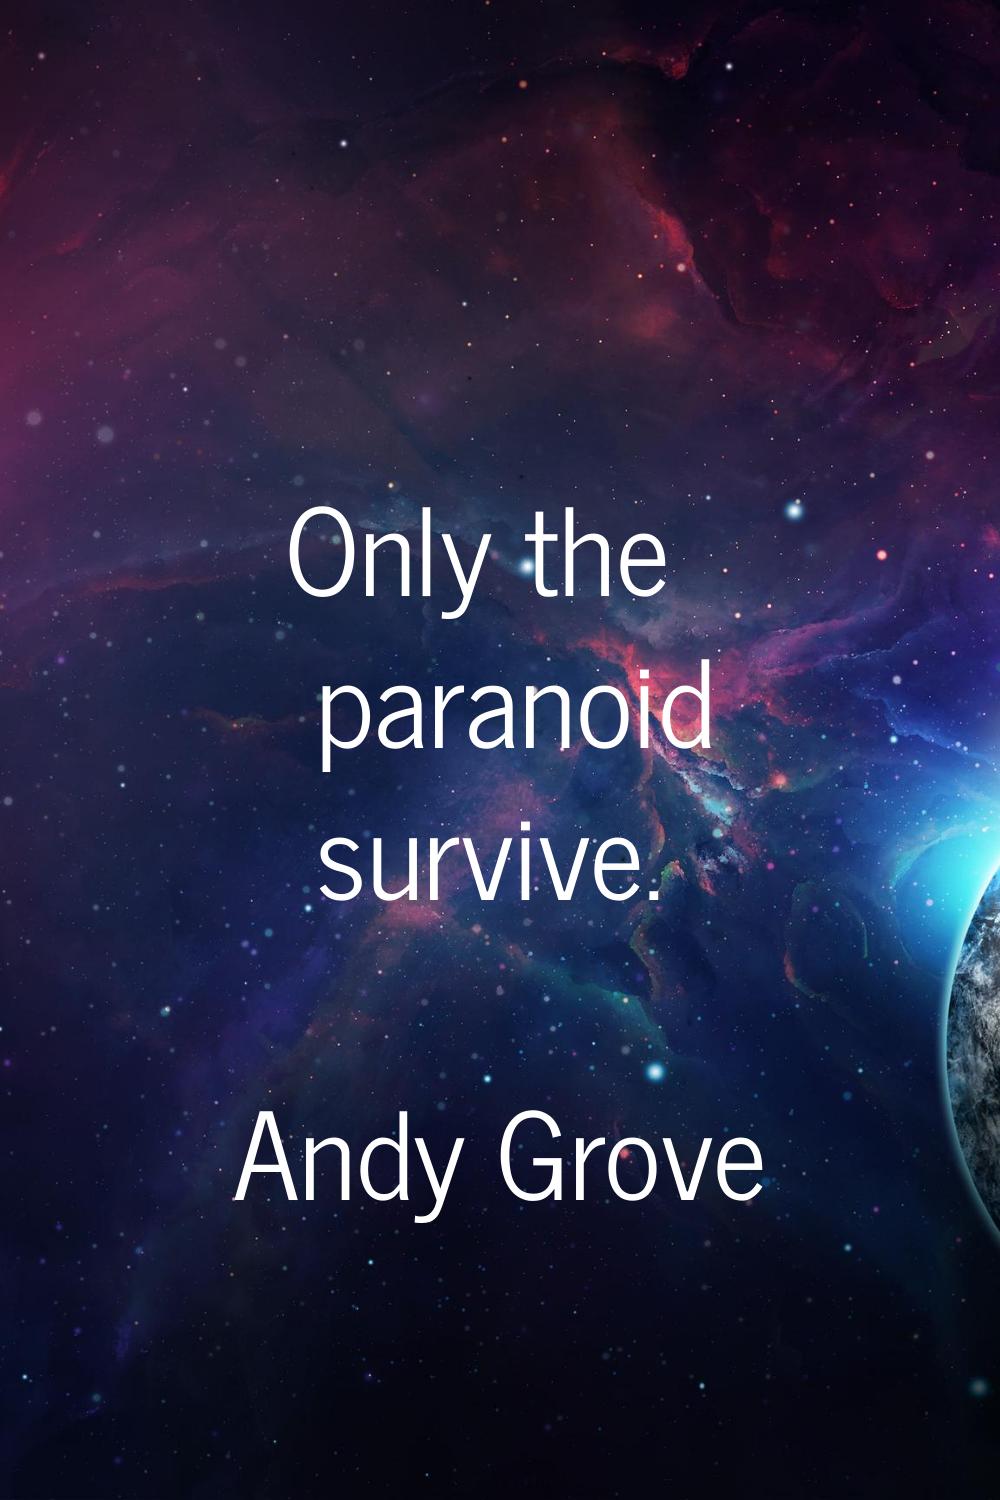 Only the paranoid survive.